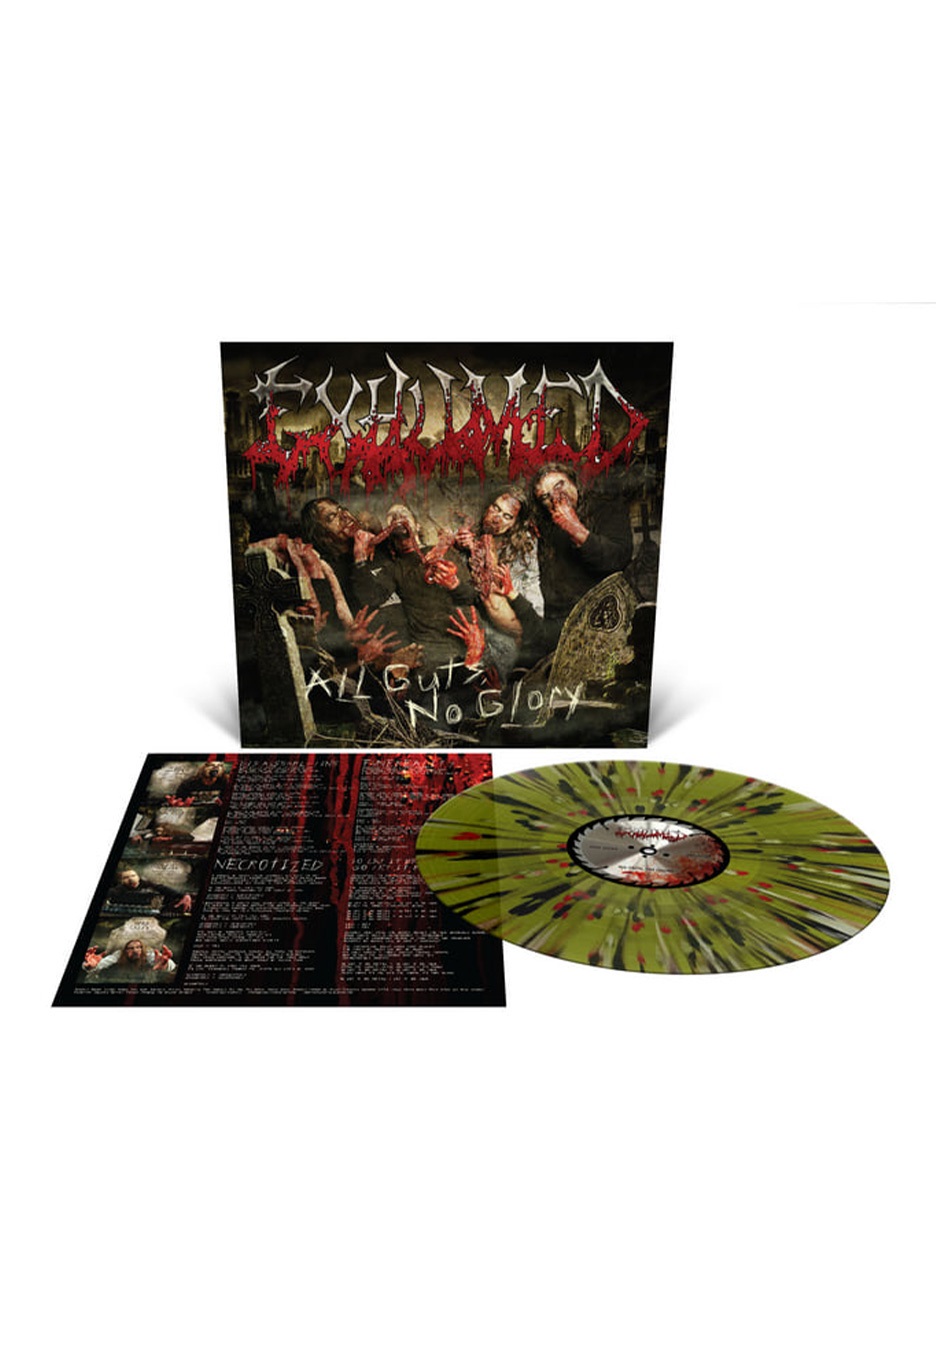 Exhumed - All Guts No Glory. (Only 1500 worldwide!)